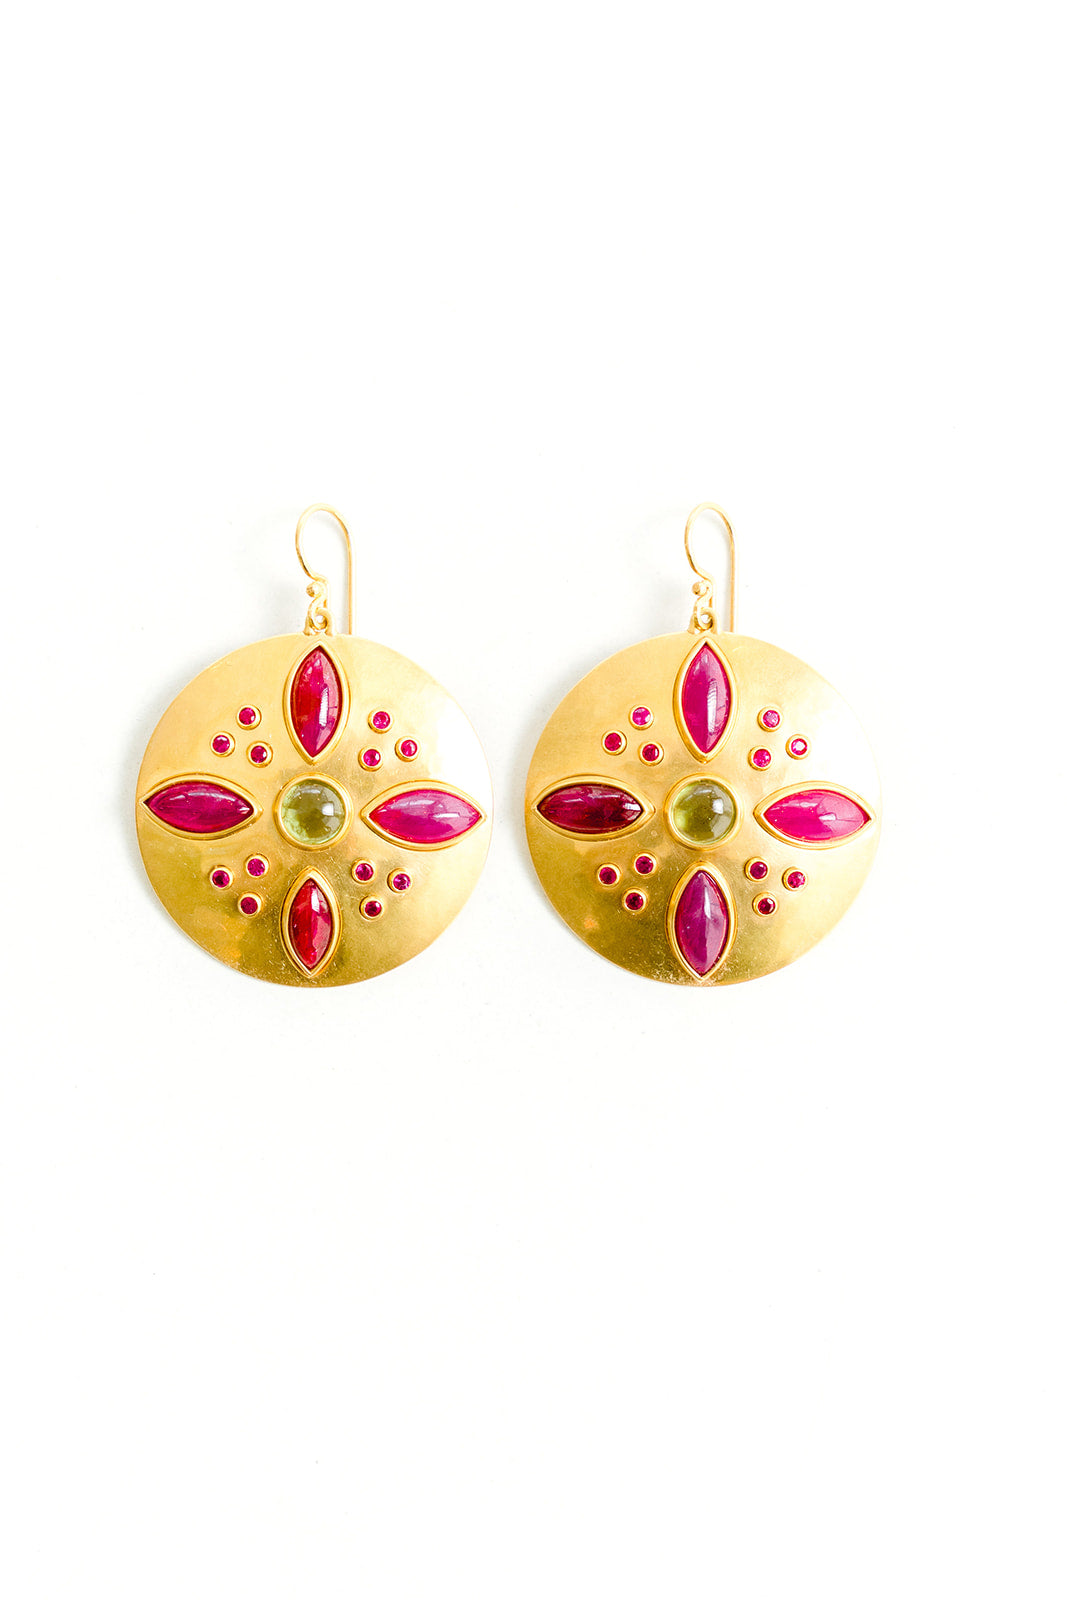 22K Yellow Gold Sheet Discs with Marquis Shaped Cabochon Rubies, Faceted Rubies, and Cabochon Peridot